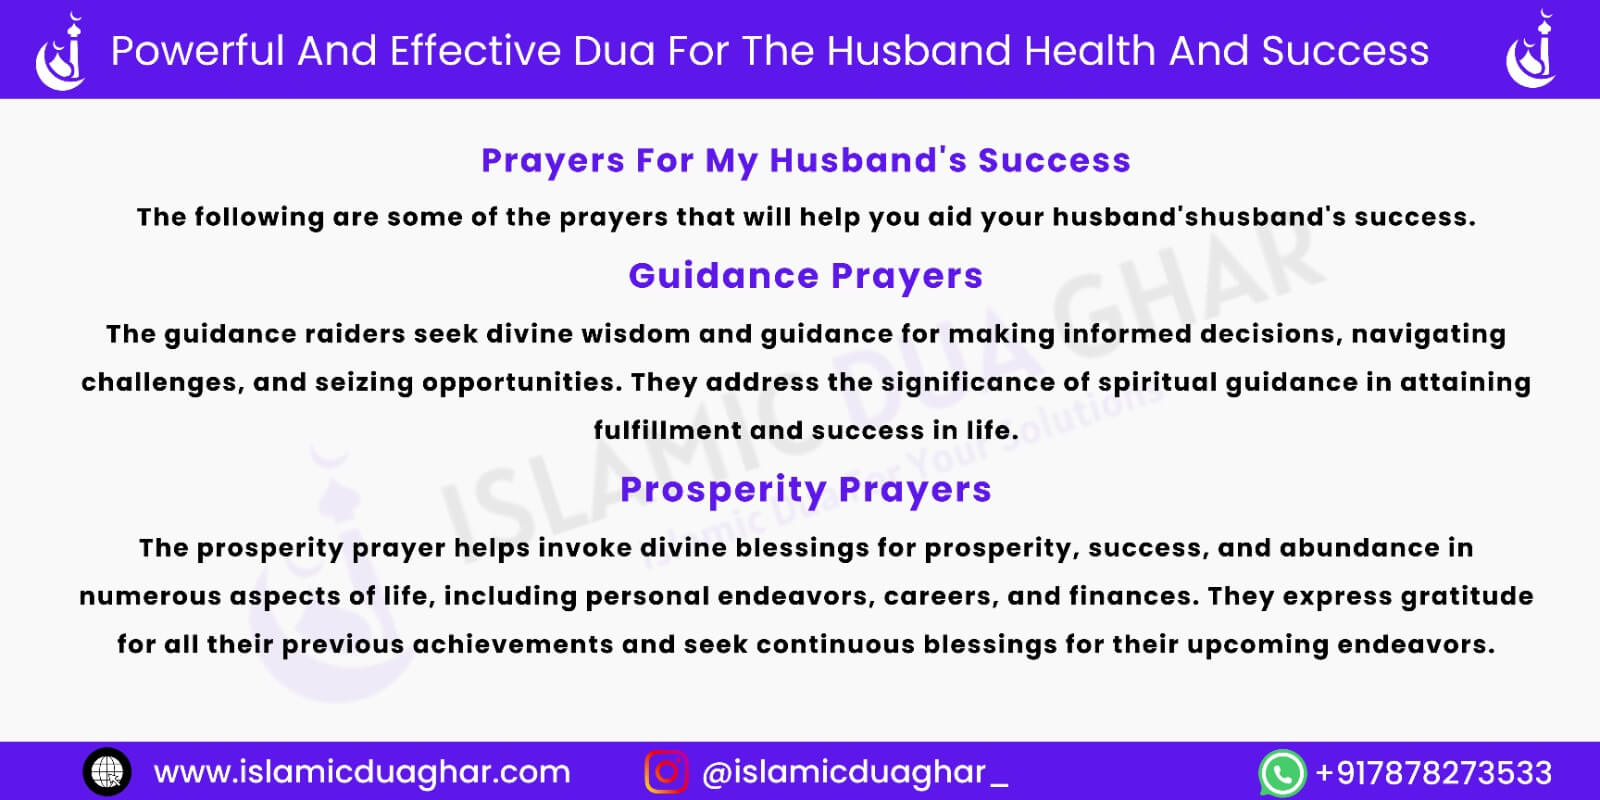 Dua For The Husband Health And Success